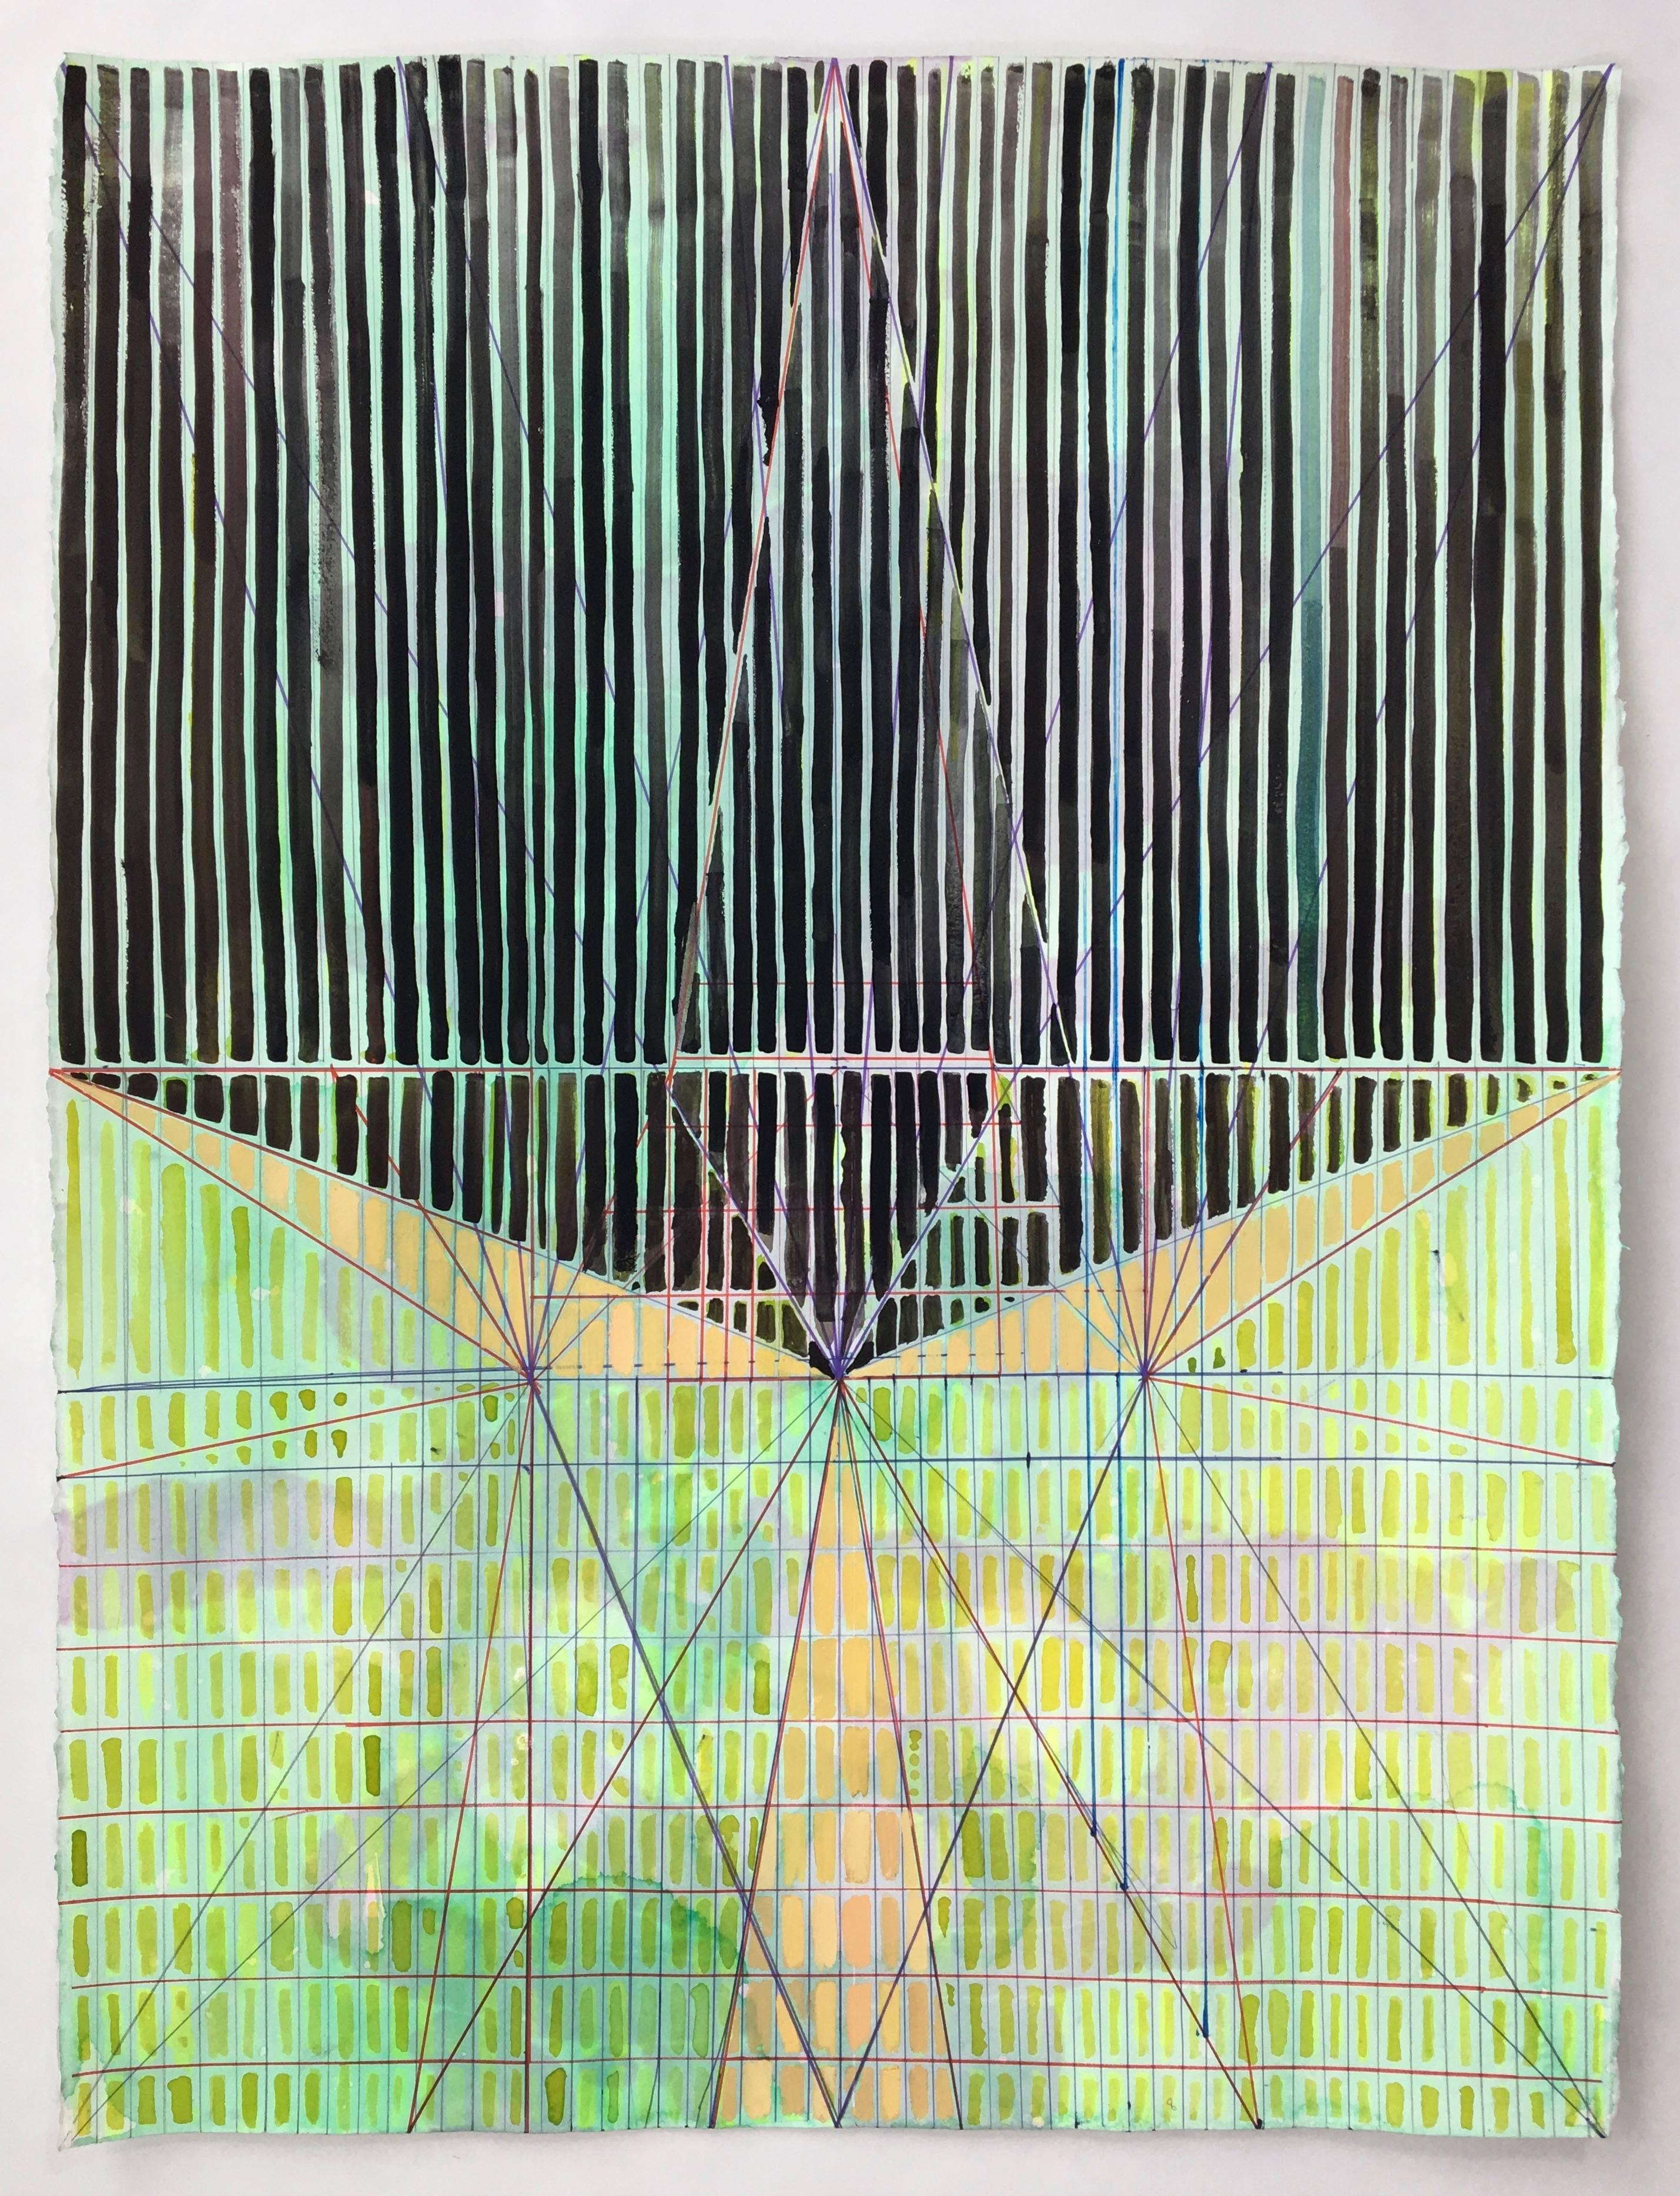 Joe Lloyd, Black Pattern, 2017, acrylic on paper, 30 x 22 inches is a colorful geometric abstract work on paper with greens and black. The hard edges of the geometric framework are complimented by the translucent layers of color and expressive brush